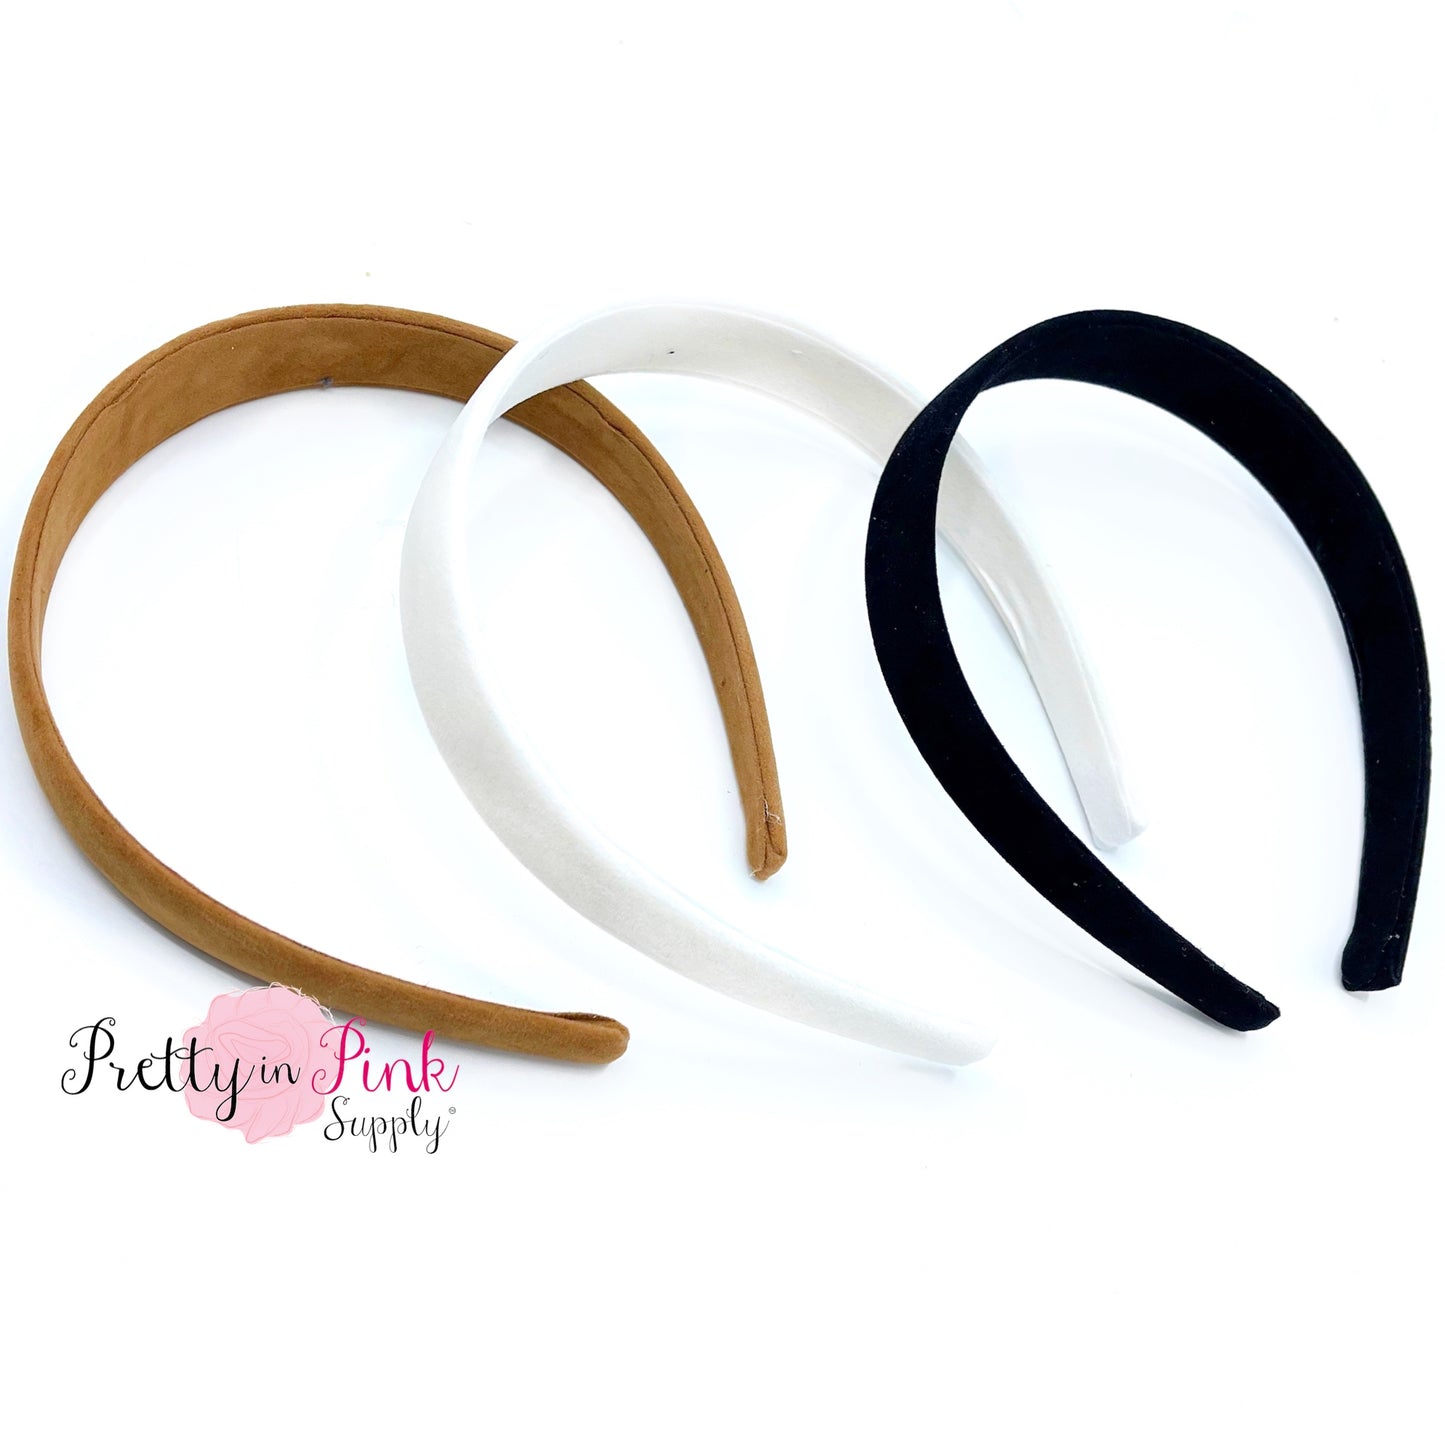 Solid suede velvet headbands laid out to show all 3 available colors.